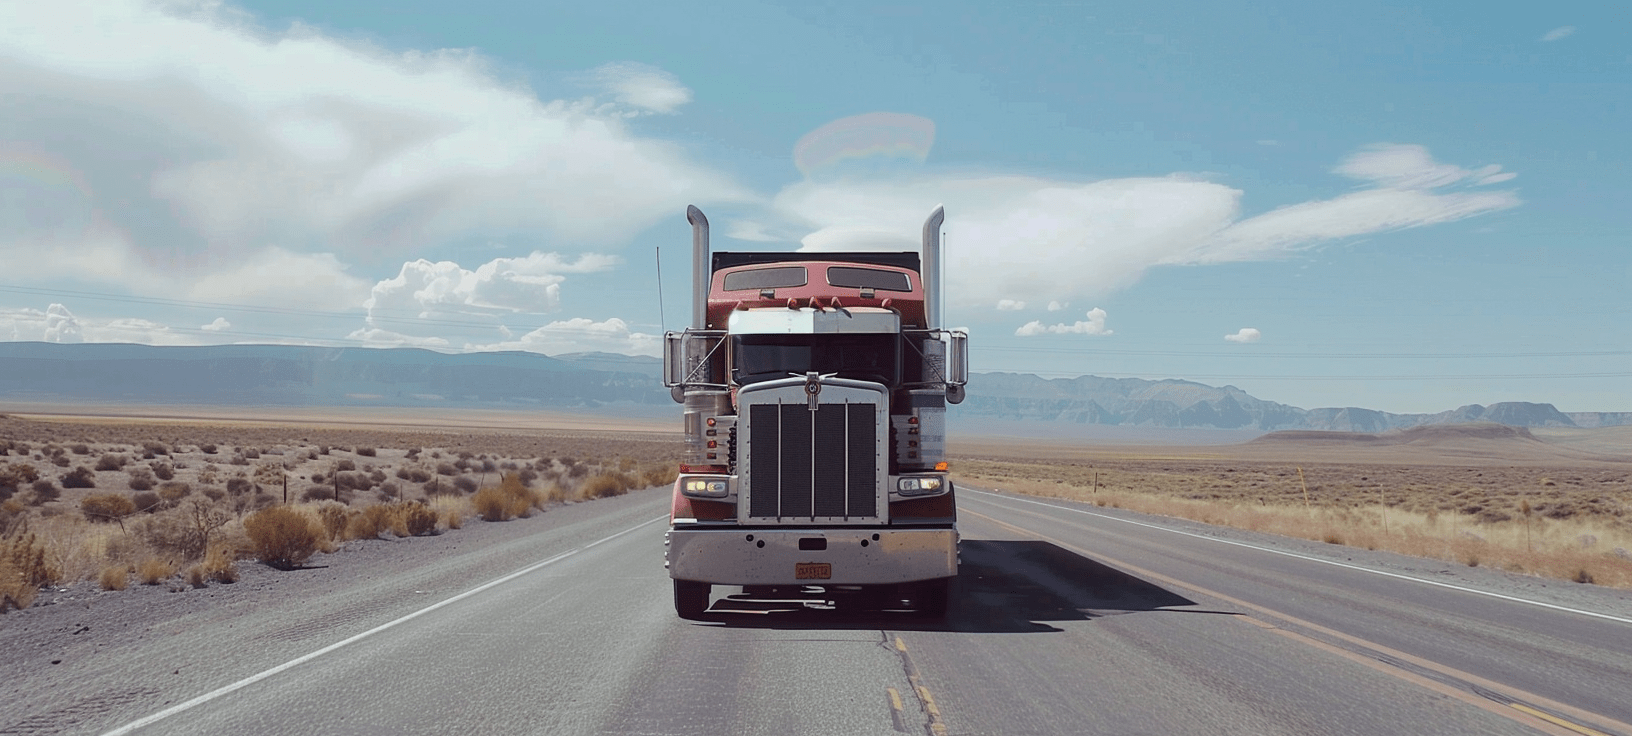 What are truck accidents worth to the victims?